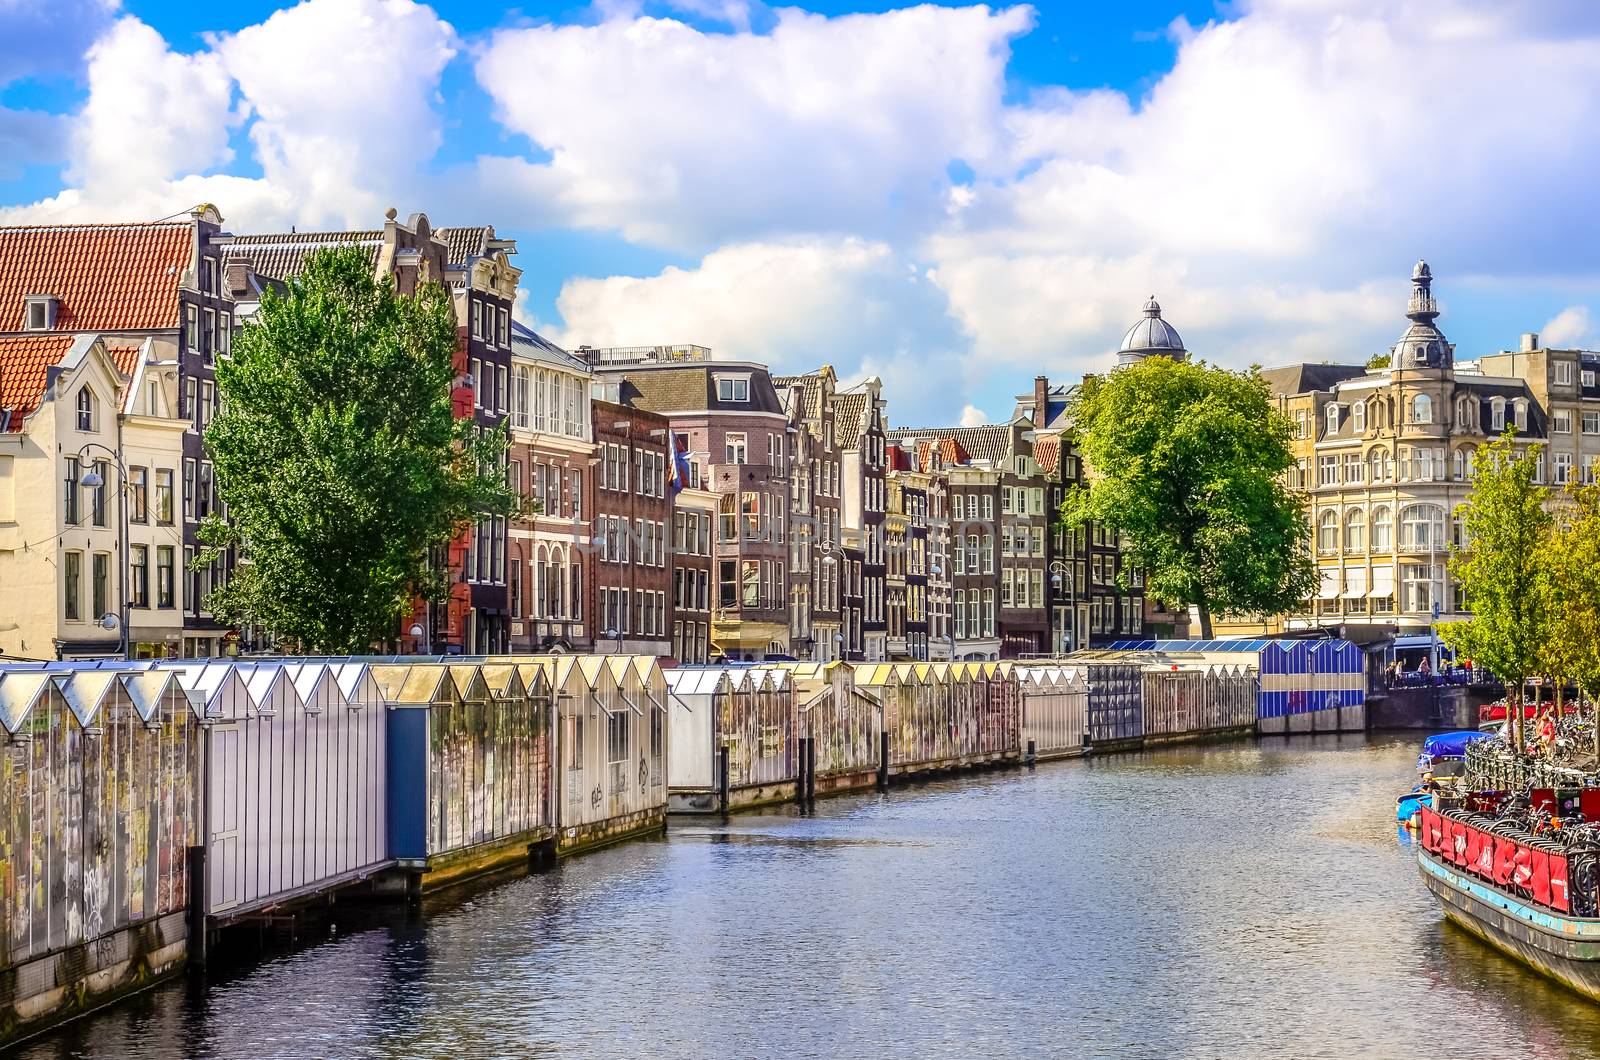 Scenic view of canal in Amsterdam at flower market by martinm303